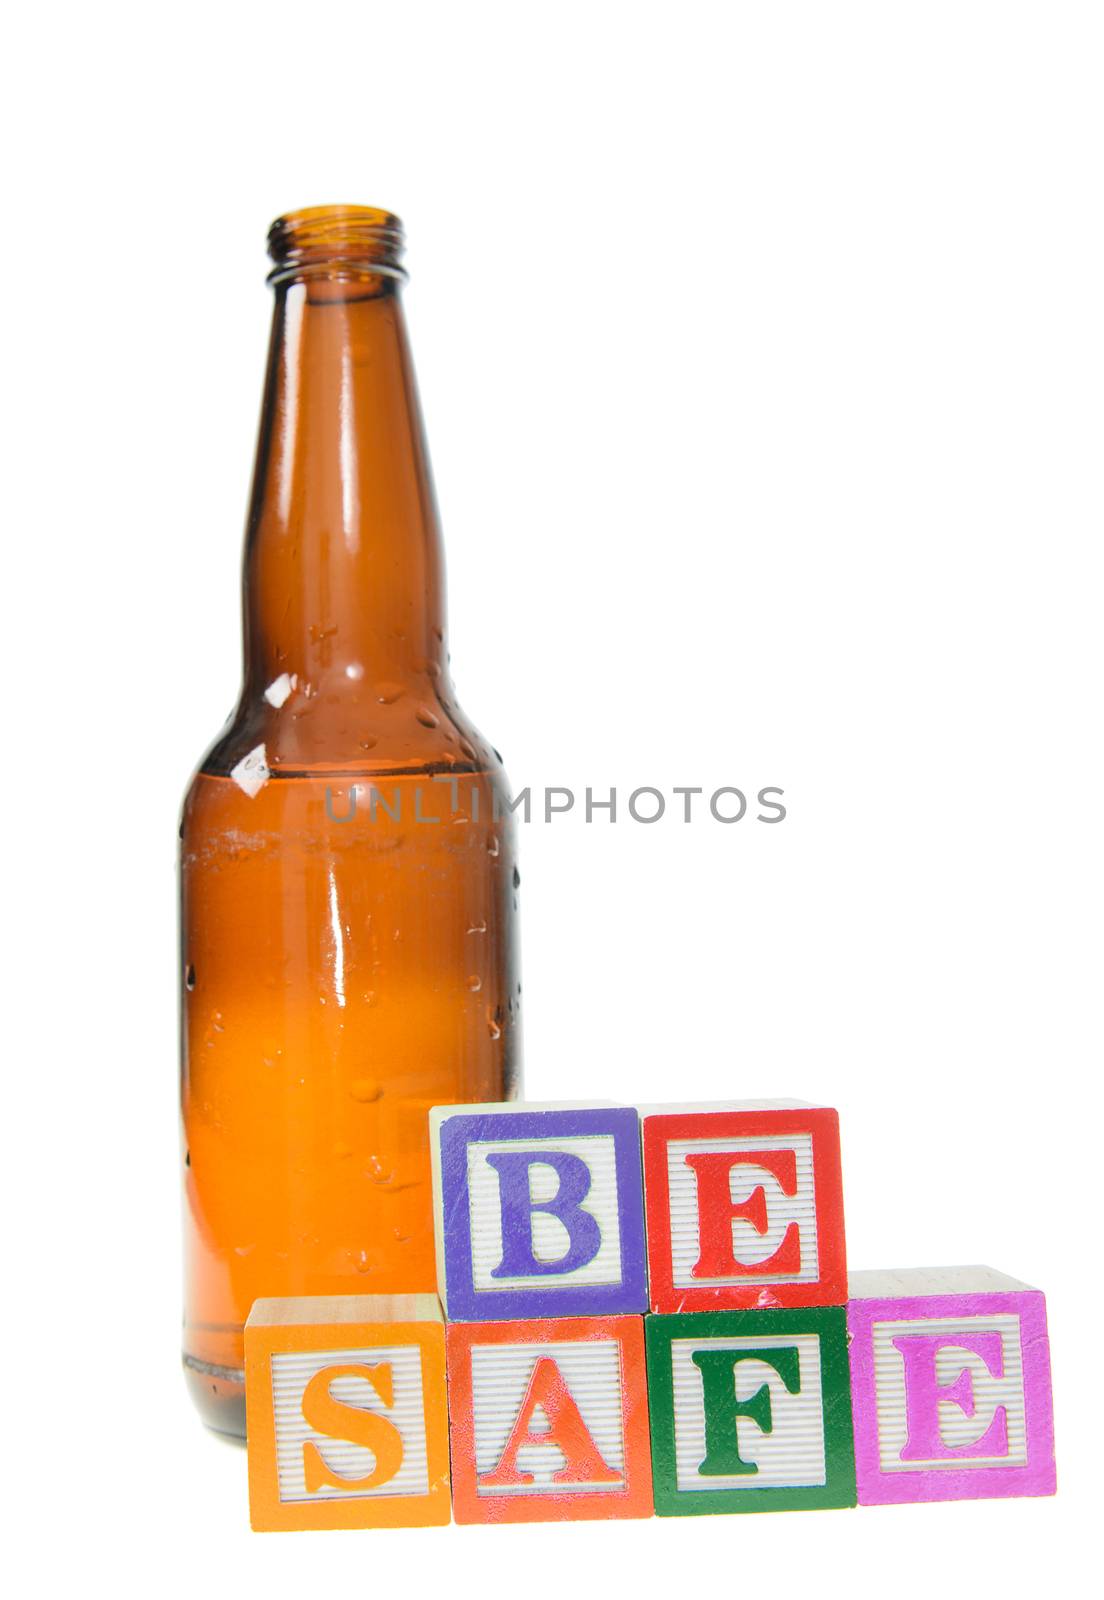 Letter blocks spelling be safe with a beer bottle. Isolated on a white background